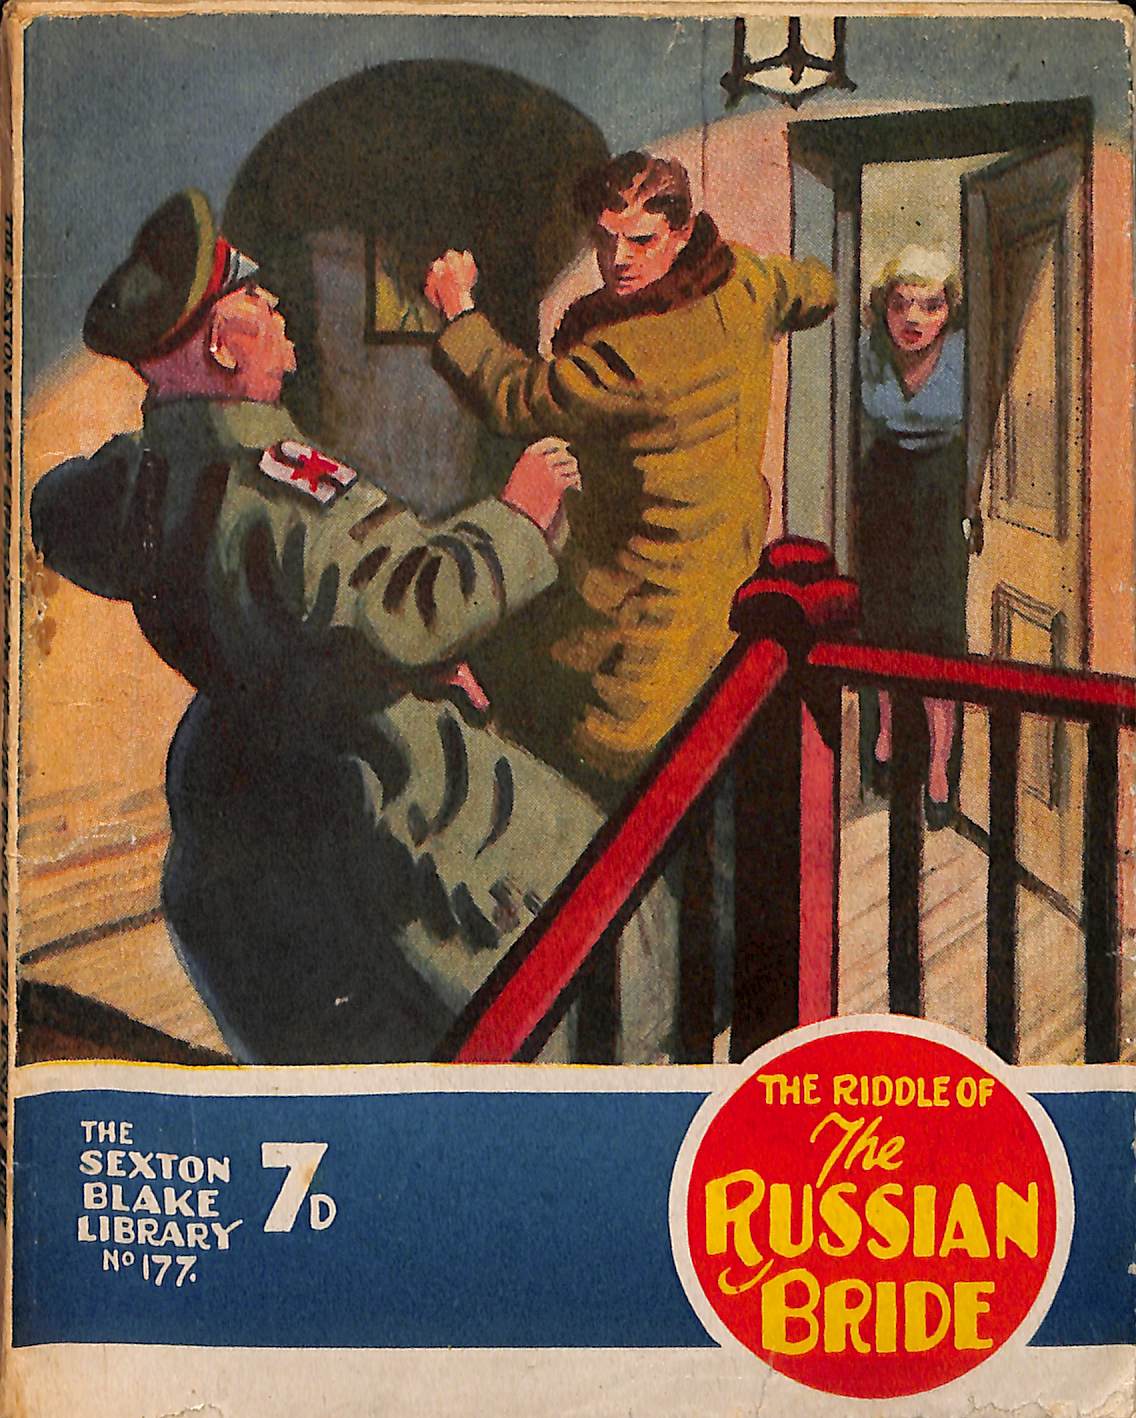 Comic Book Cover For Sexton Blake Library S3 177 - The Riddle of the Russian Bride